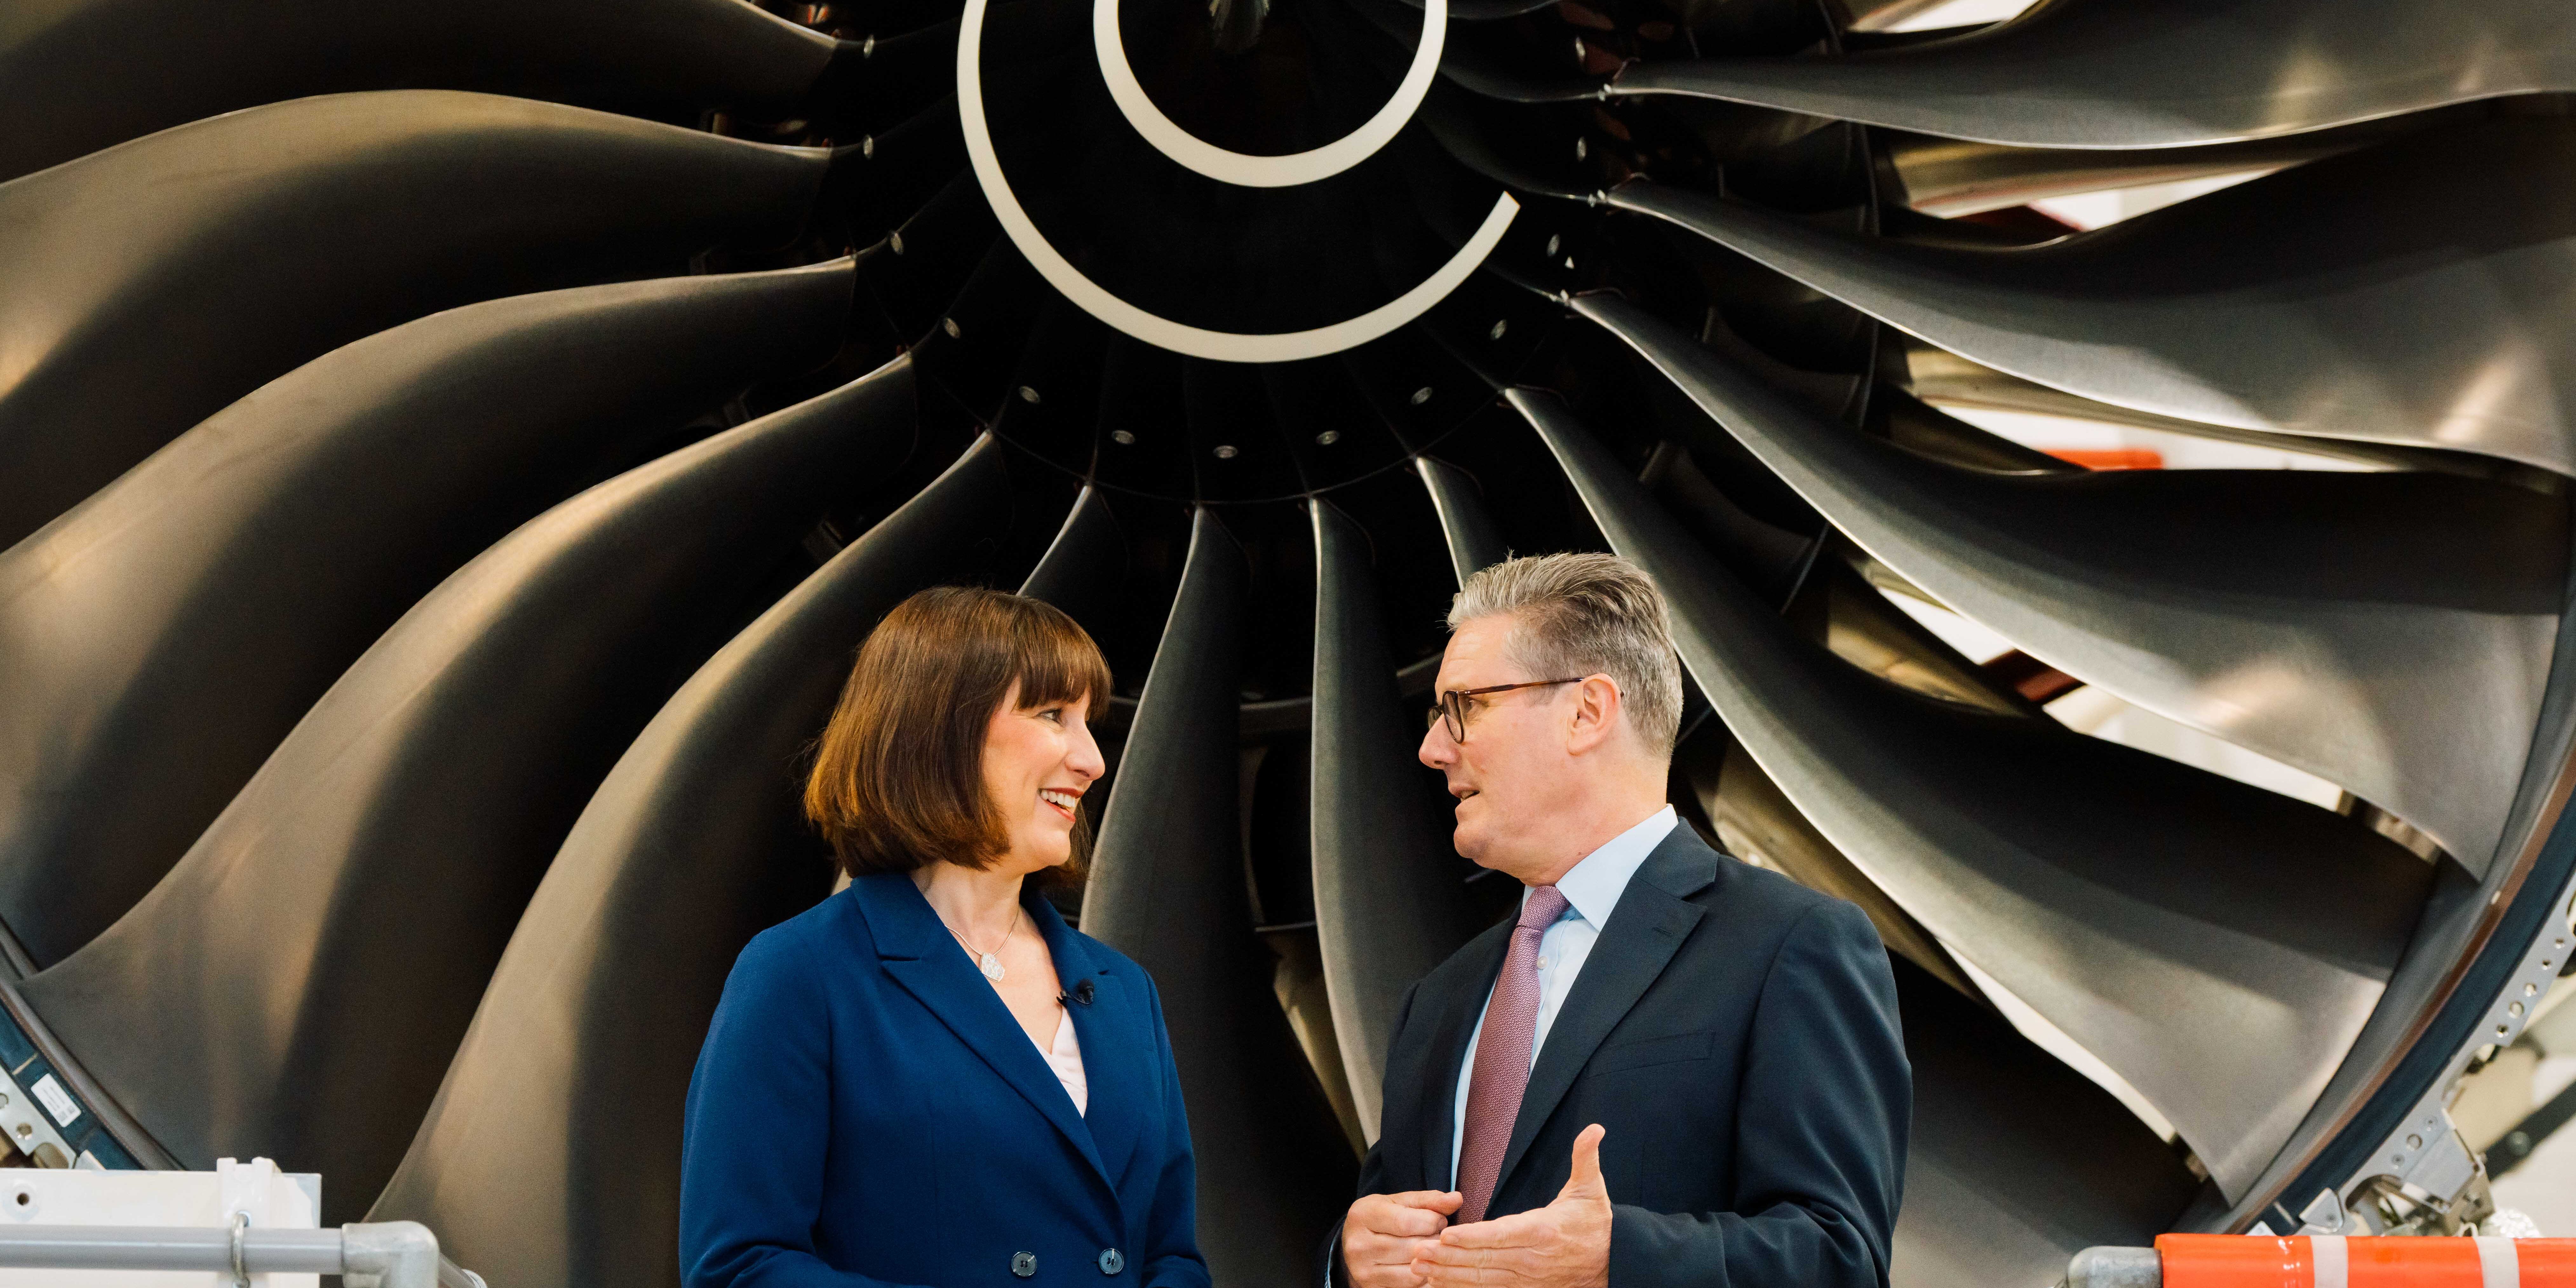 Rachel Reeves and Keir Starmer facing each other in front of a turbine.